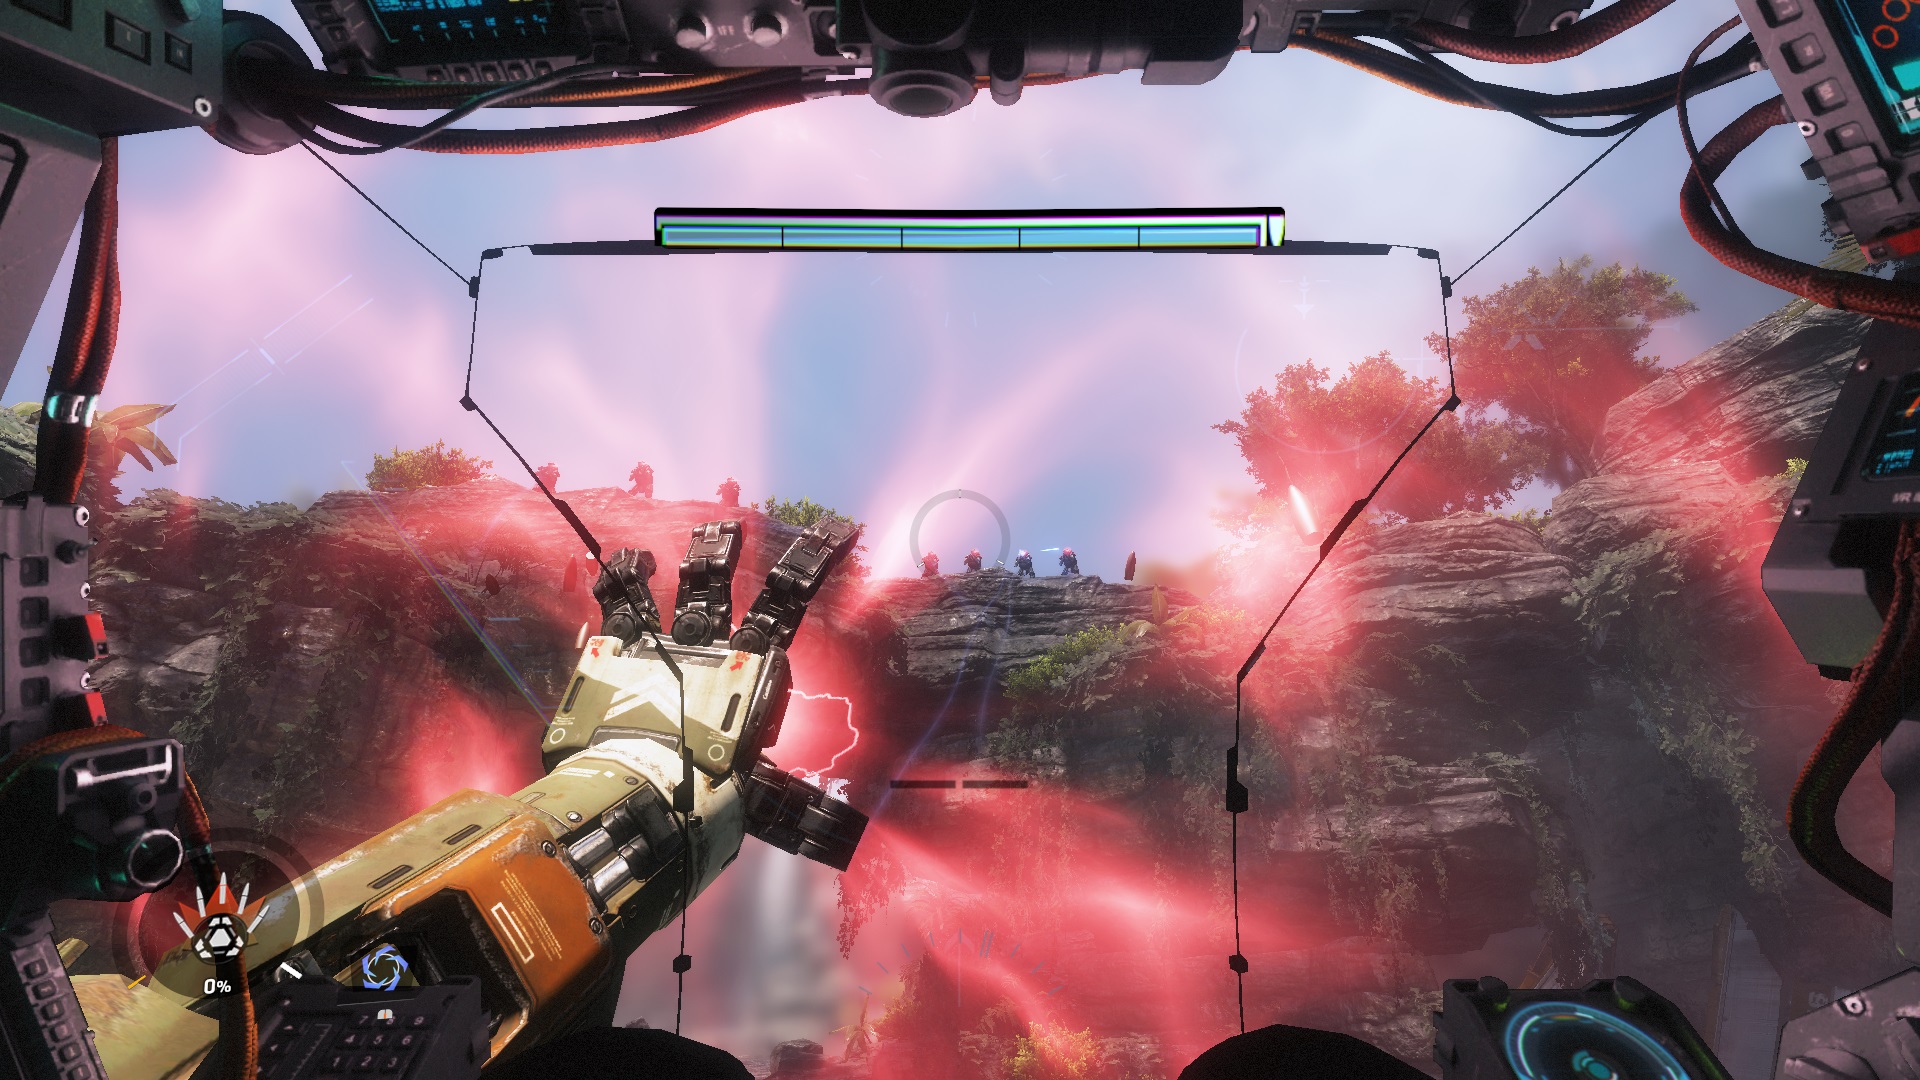 Apex Legends: The Titanfall battle royale game that lets you play your way  - CNET